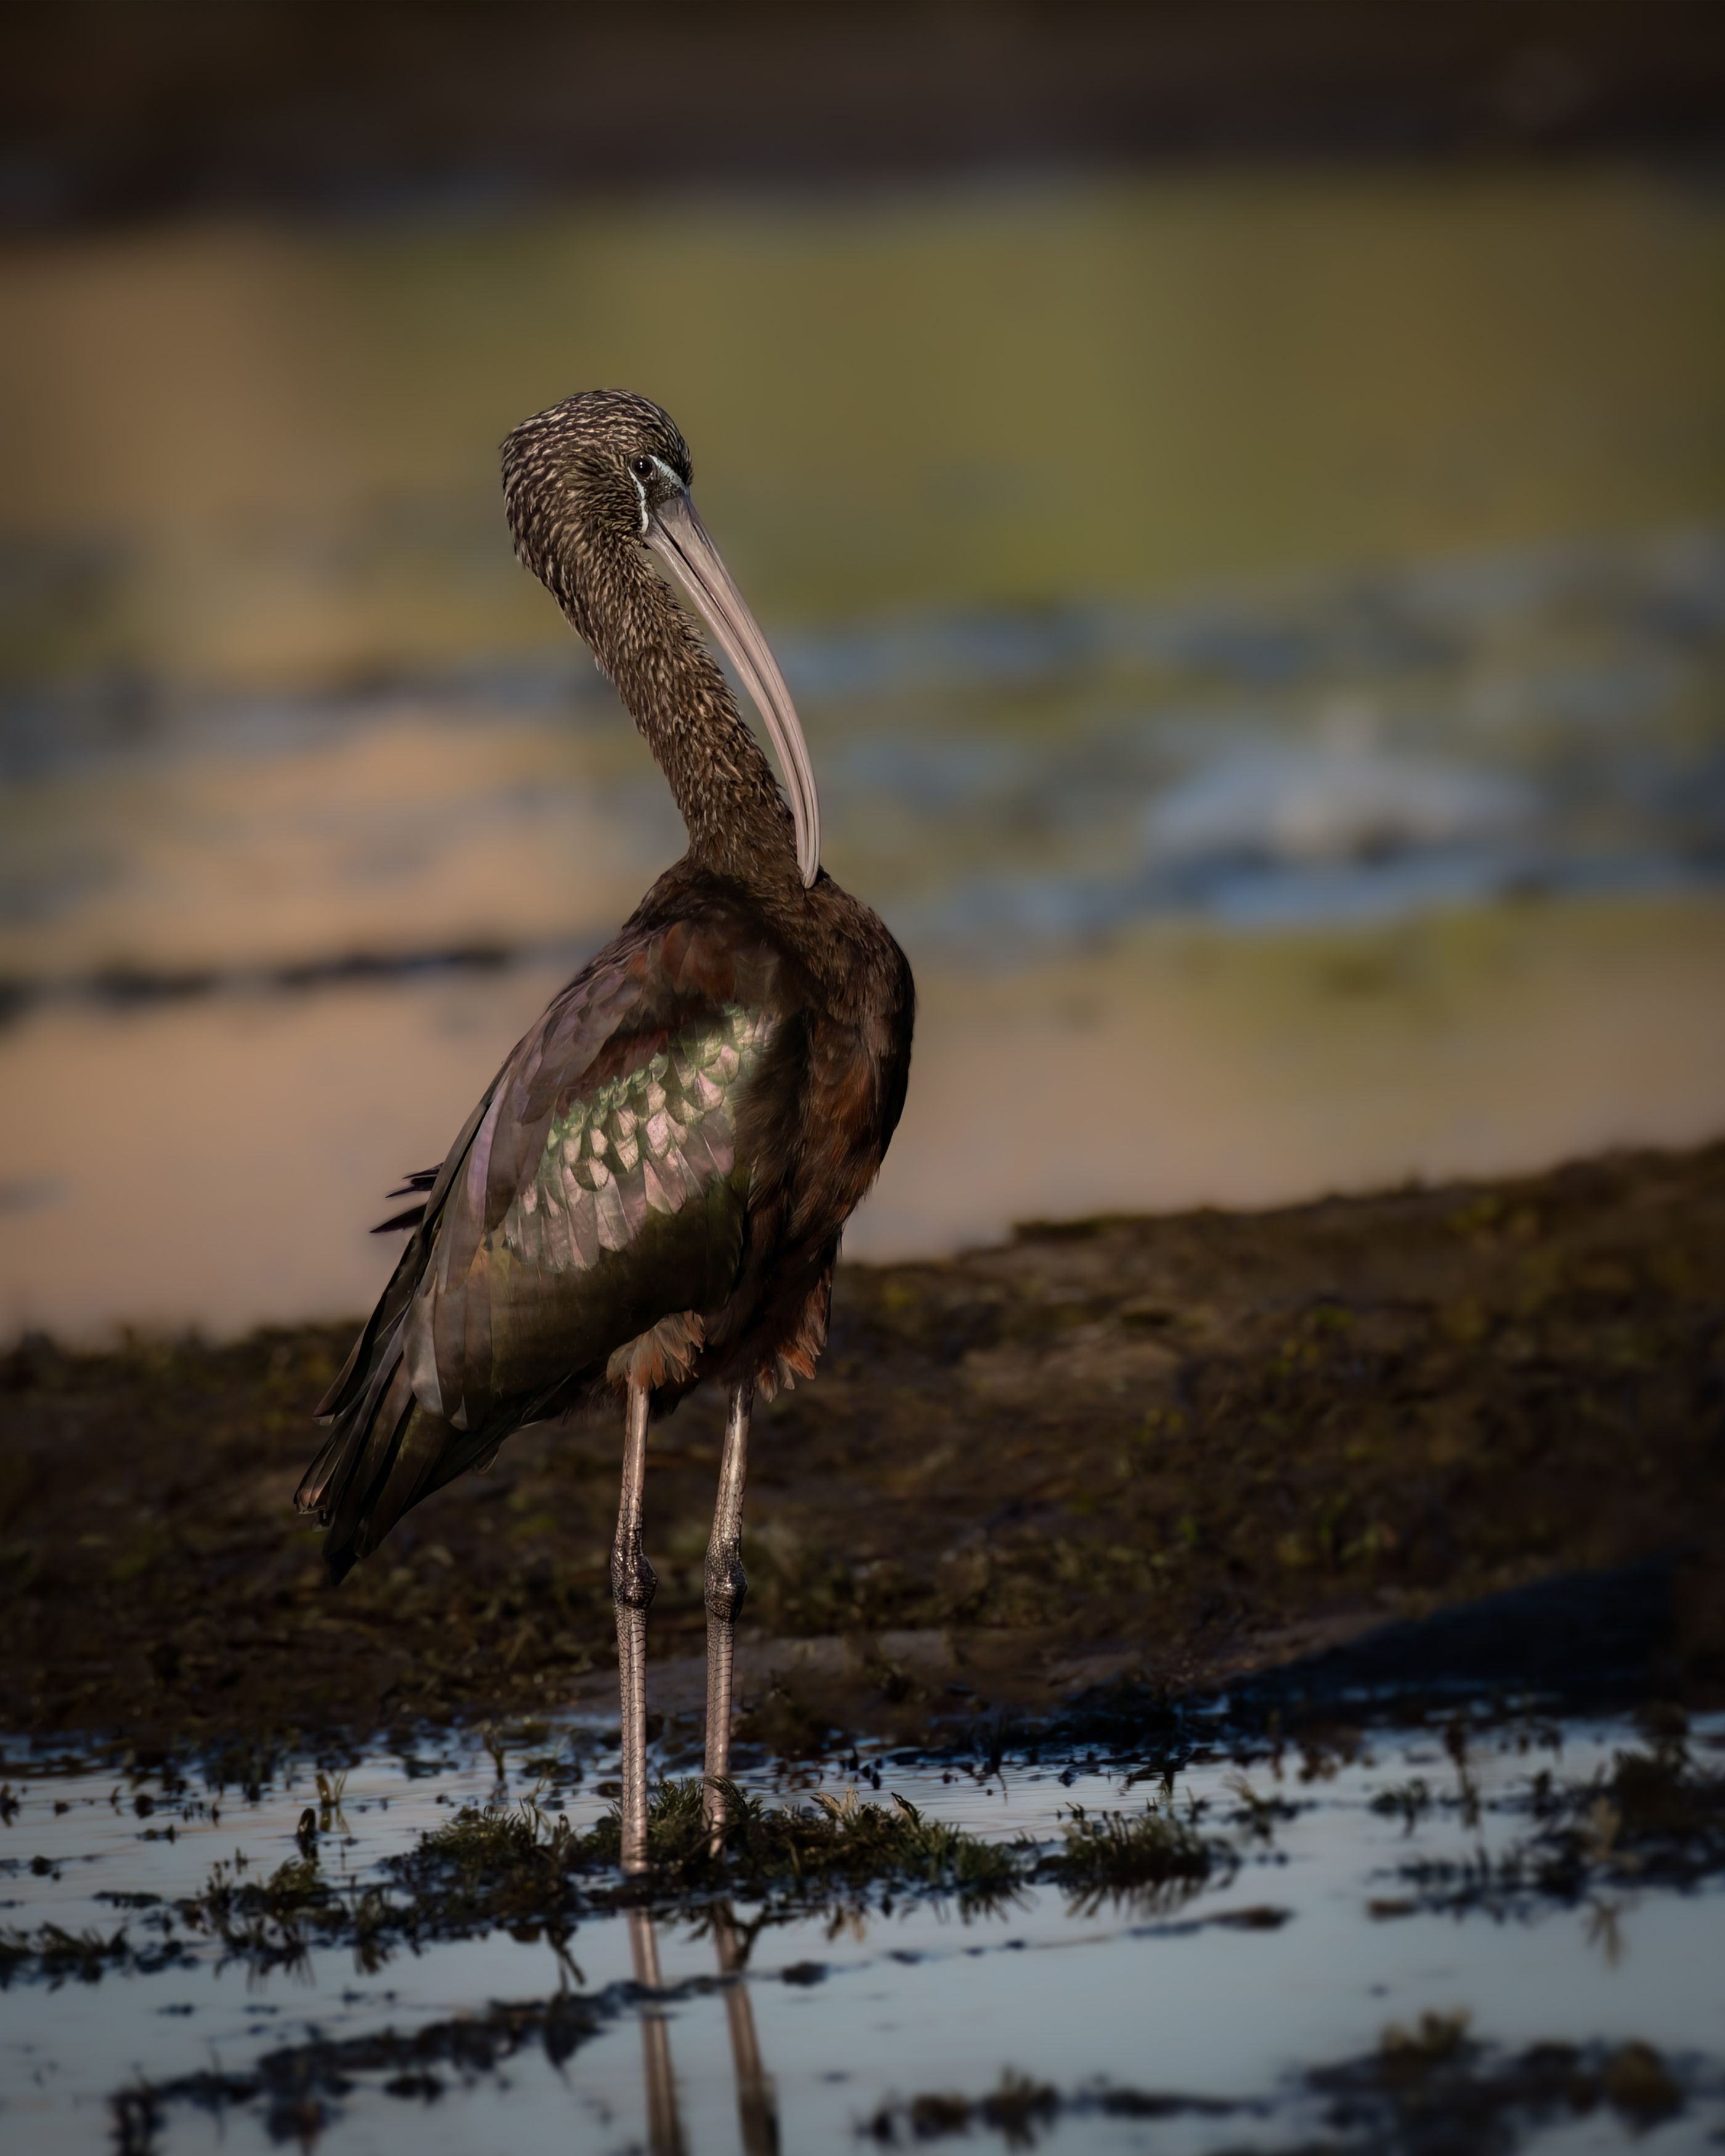 glossy ibis, ibis, bird, birds, animal, animals, wing, wings, feather, feathers, day, sun, color, colors, colorful, glossy, water, lake, river, Ahmed Zaeitar